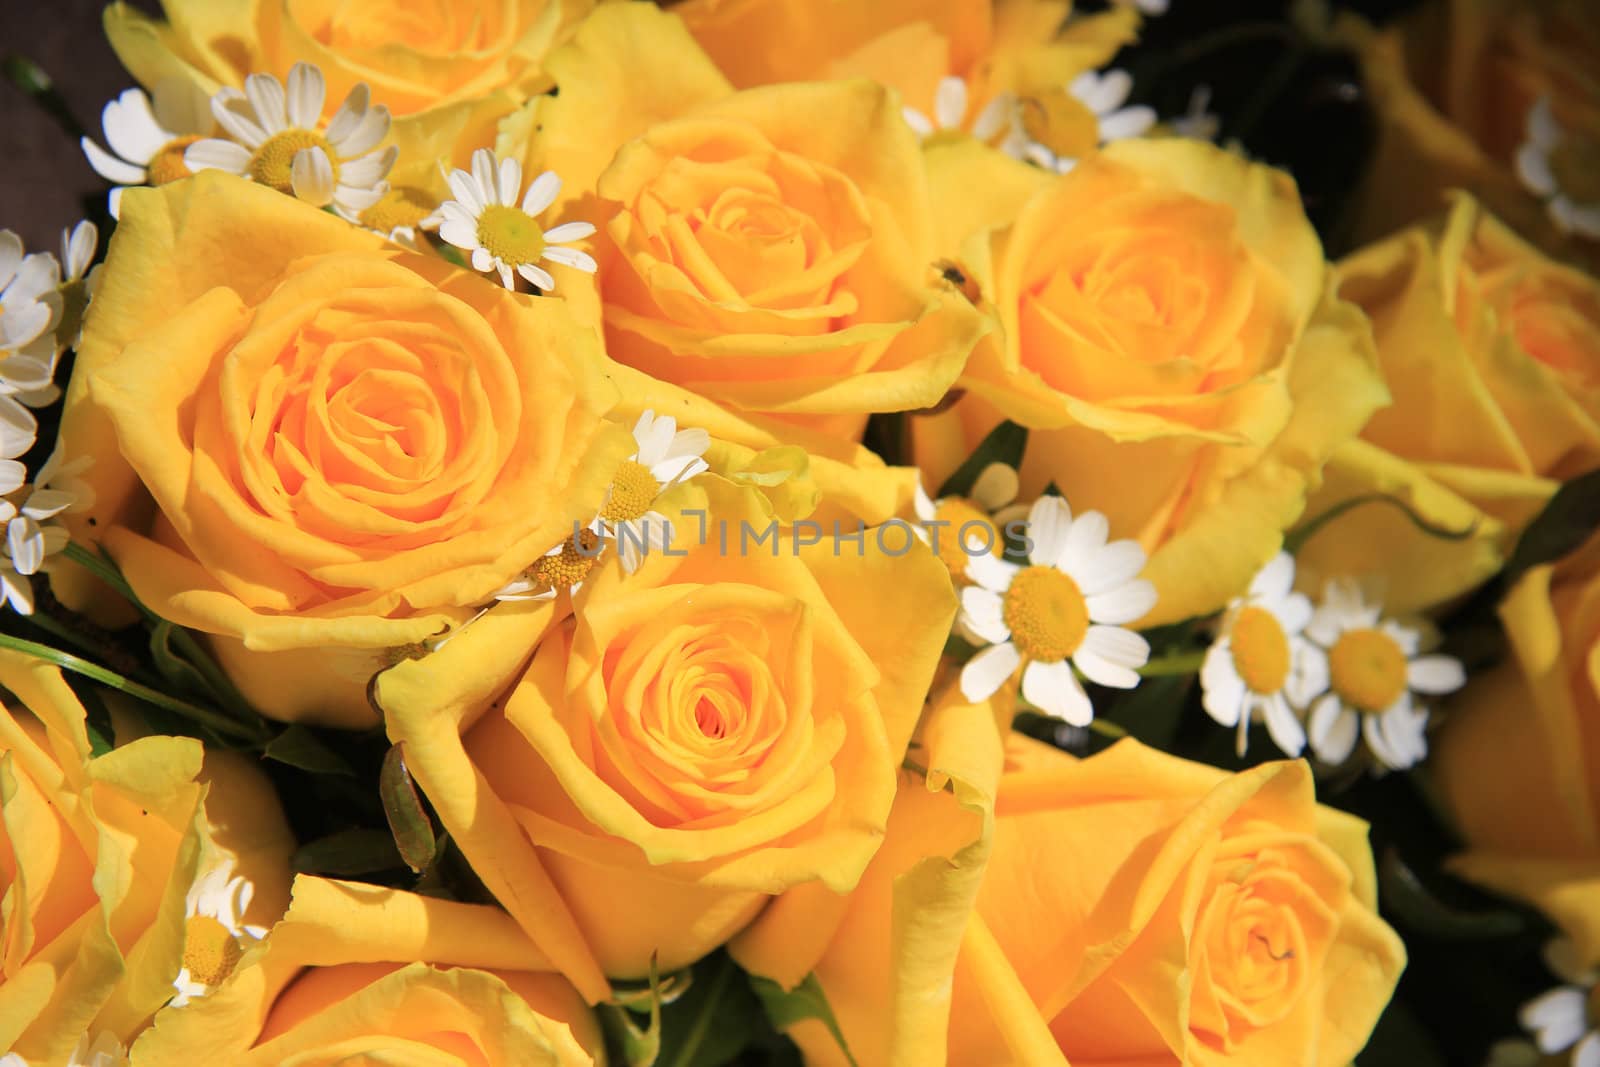 yellow roses and matricaria in sunlight by studioportosabbia